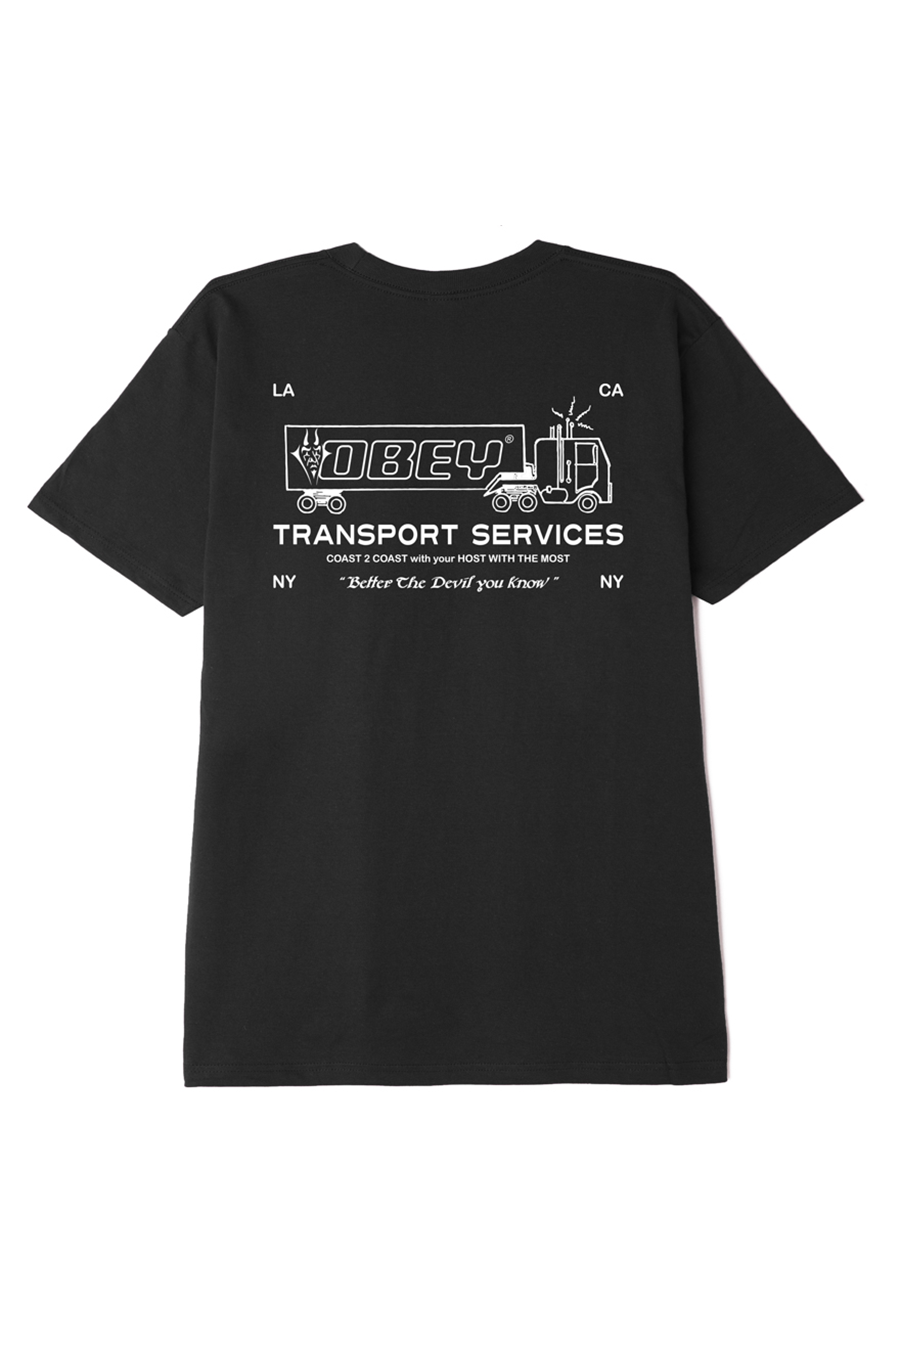 Transport Services Classic Tee | Black - Main Image Number 1 of 2